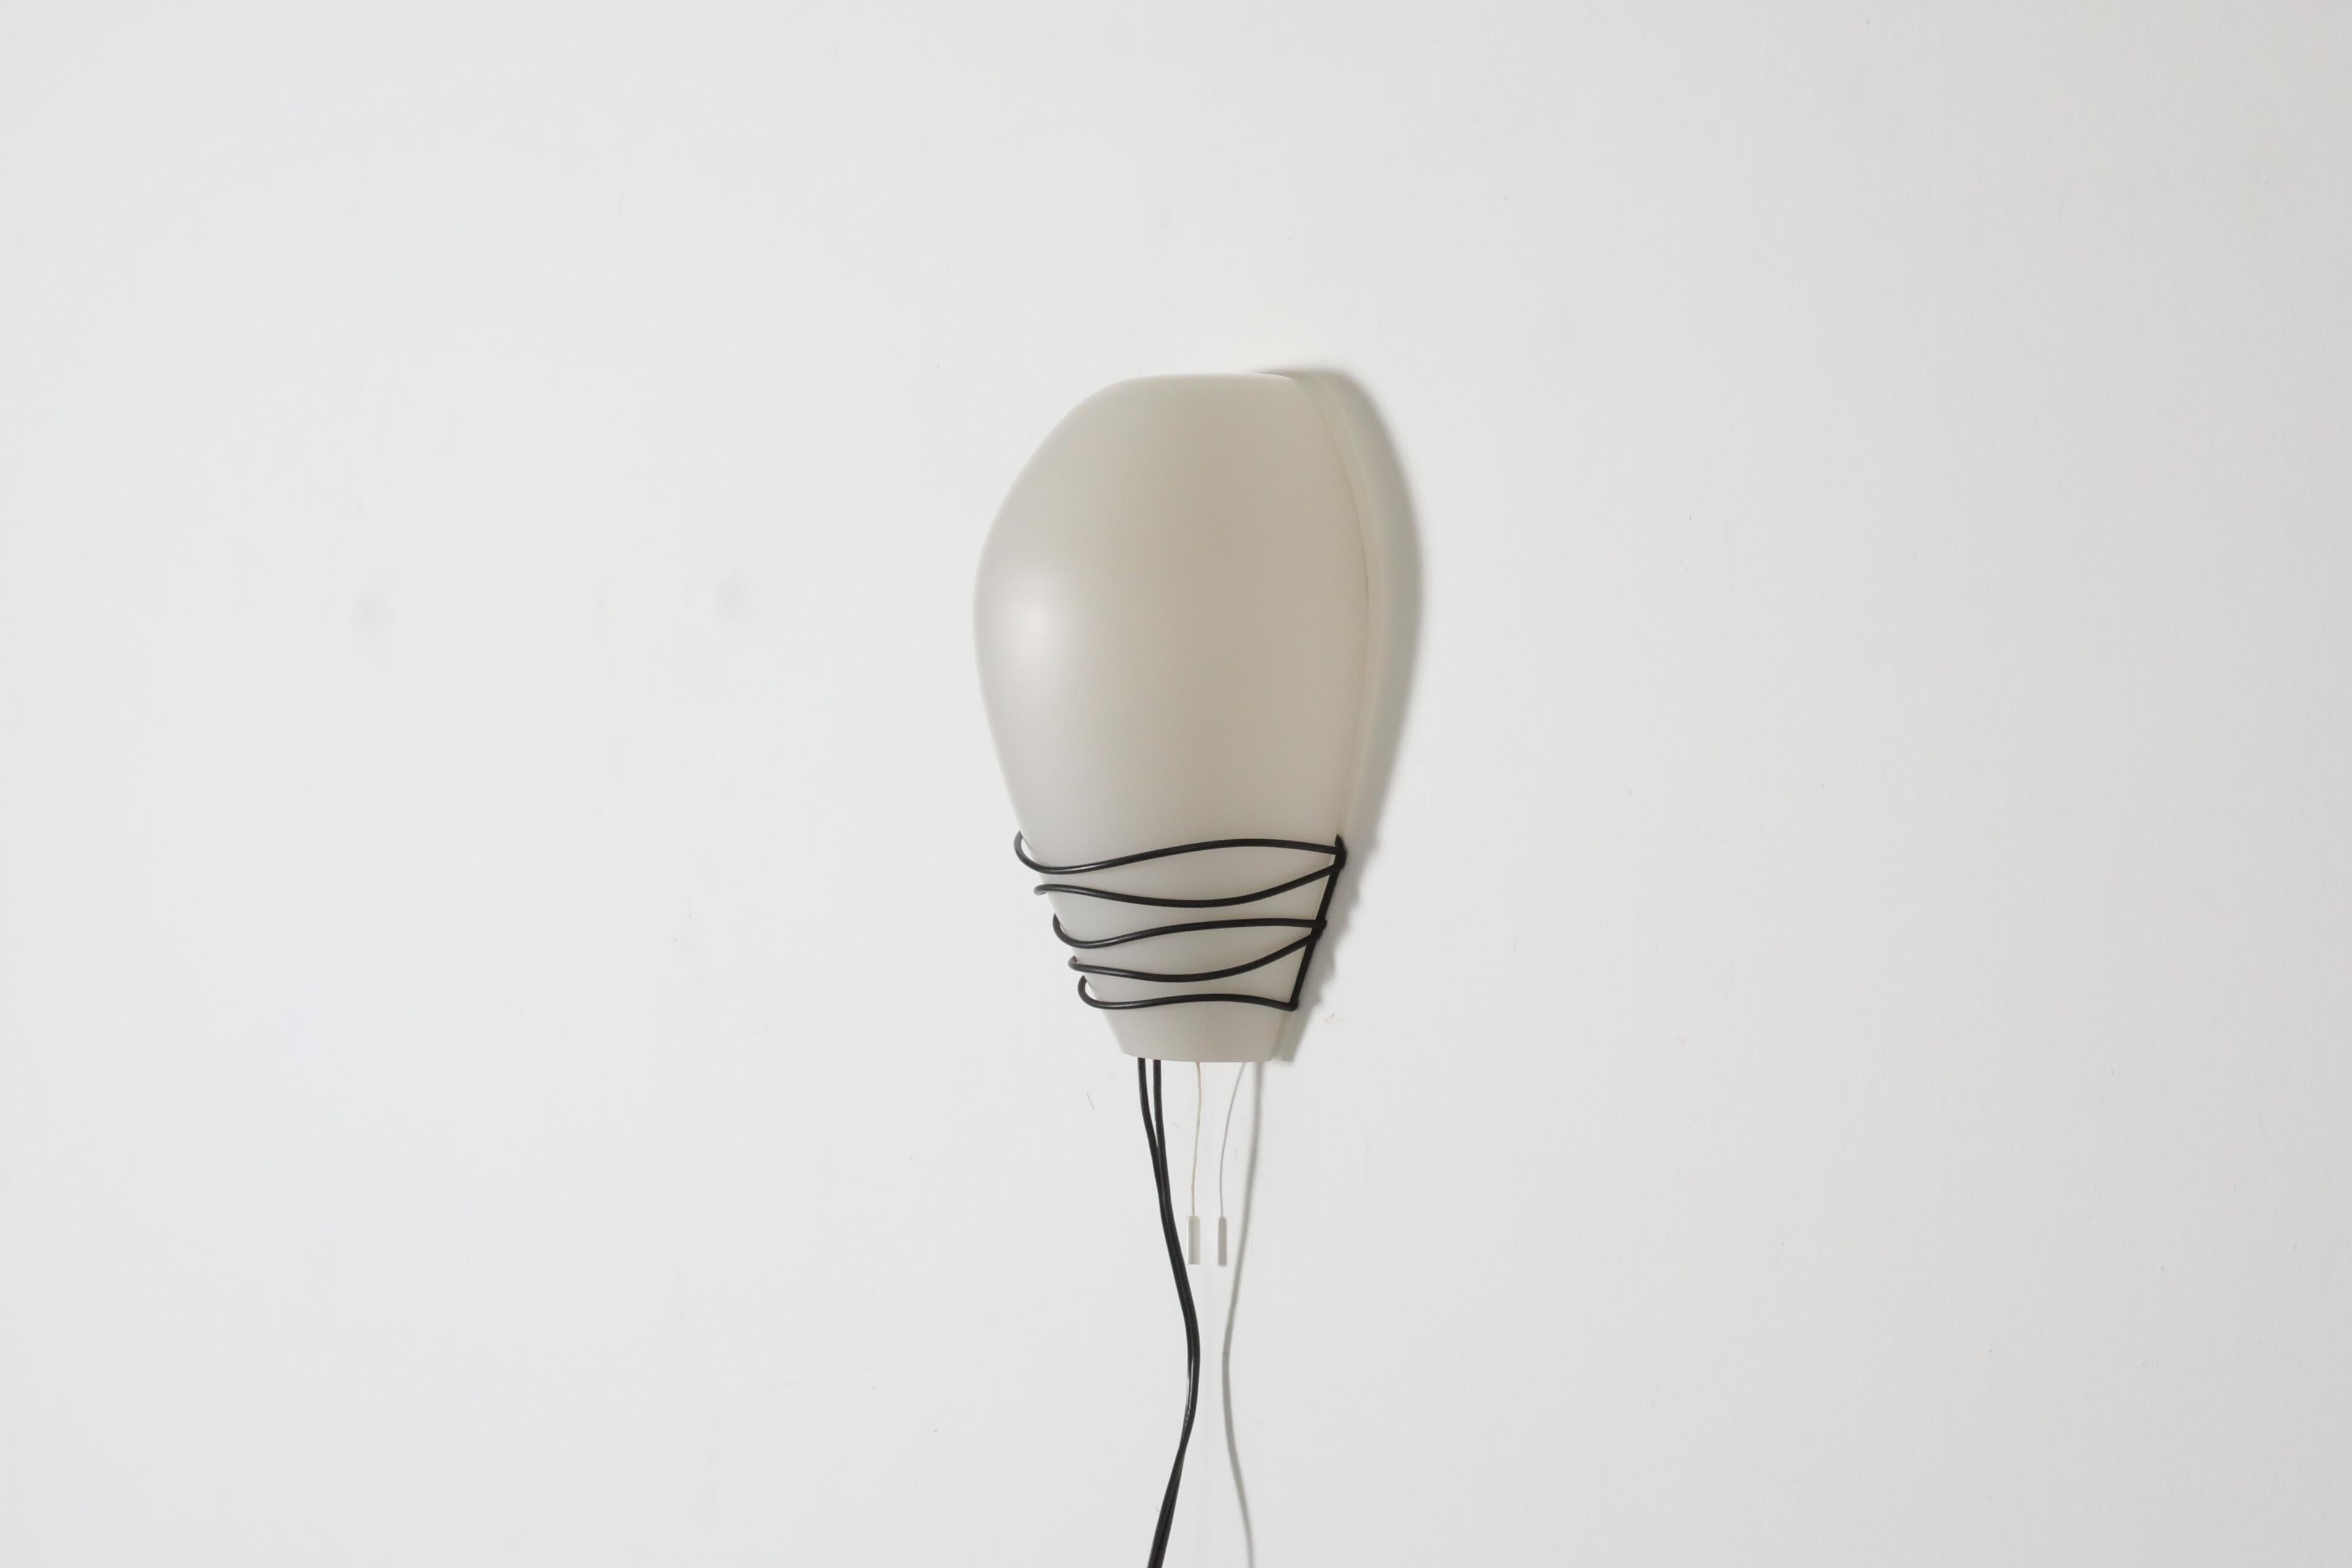 Philips Milk Glass Wall Sconce w/ Black Wire Mount and Milk Glass Shade, 1950's For Sale 1